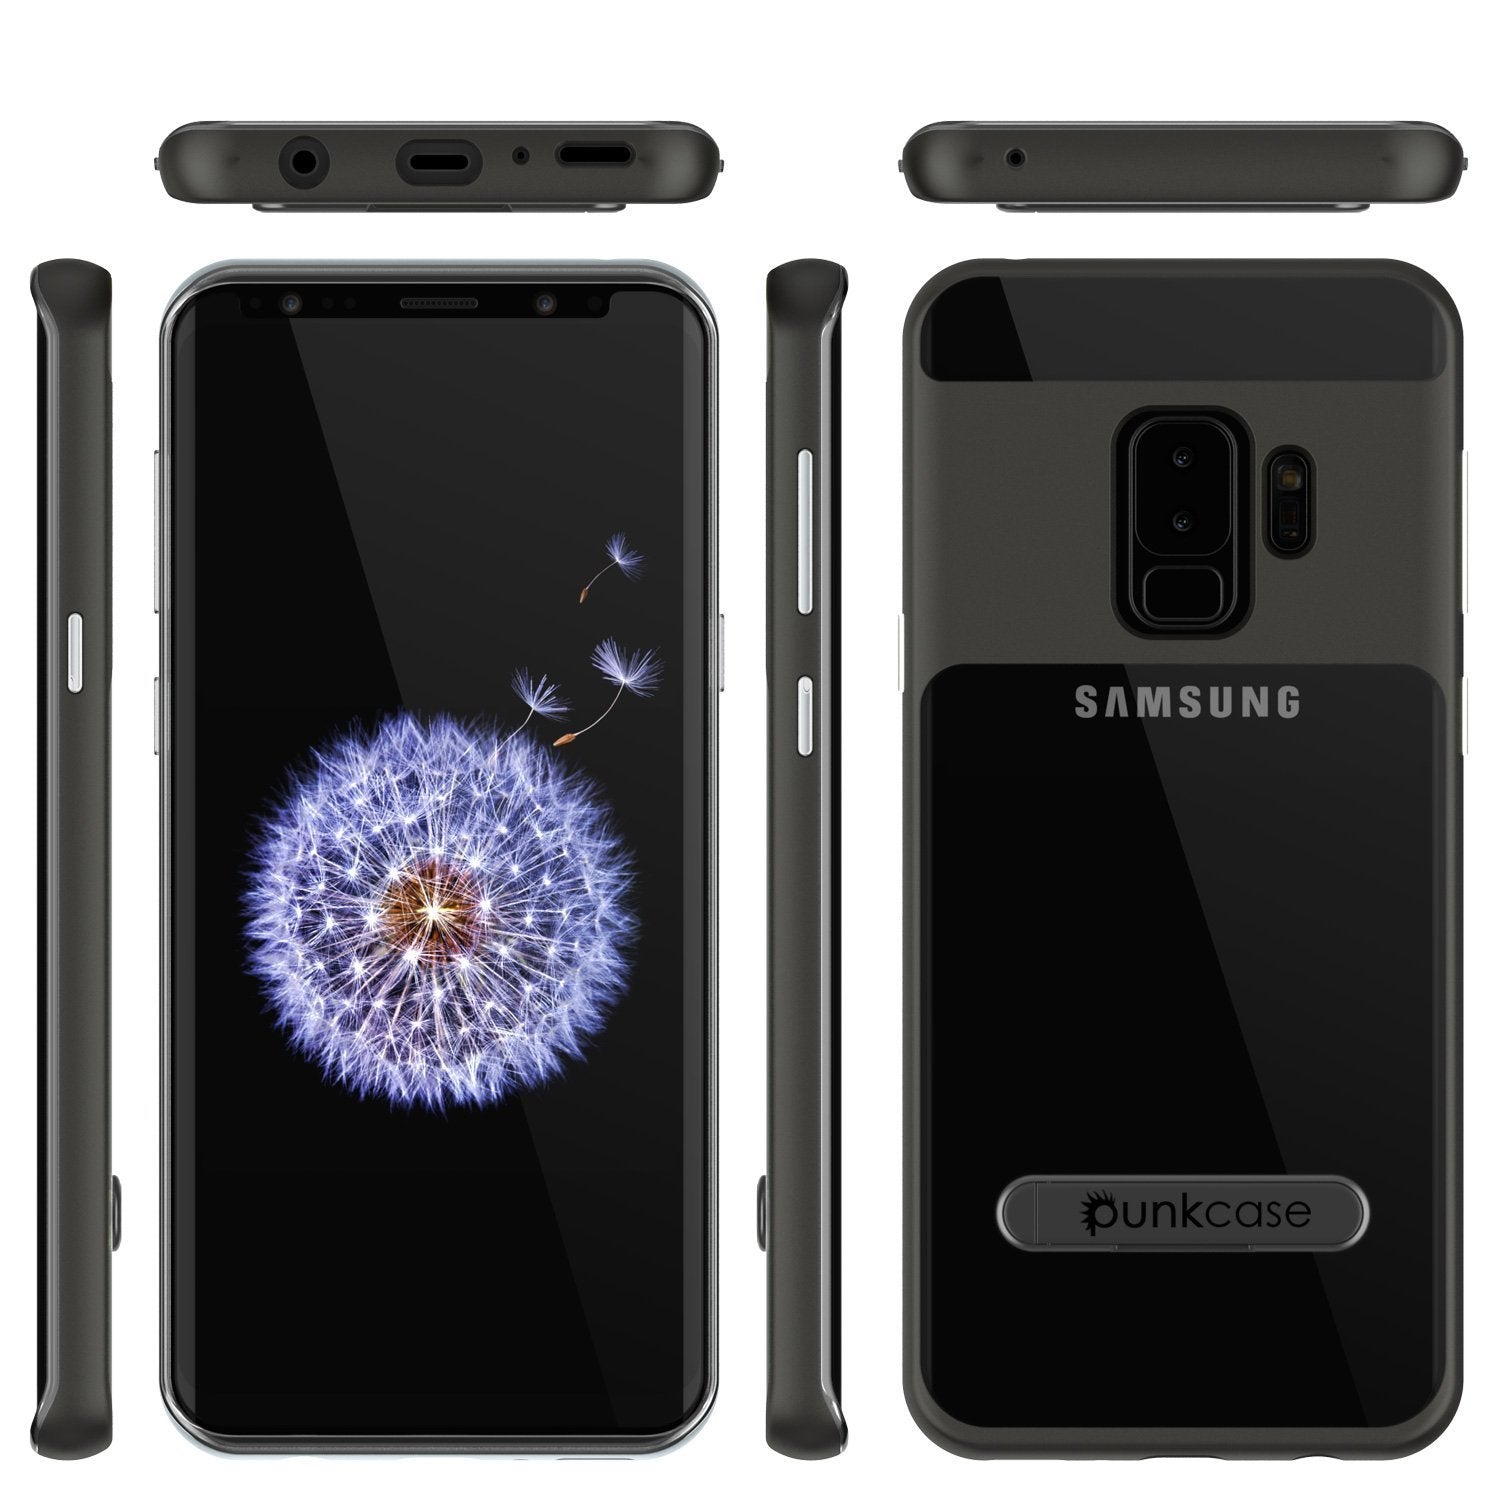 Galaxy S9+ Plus Case, PUNKcase [LUCID 3.0 Series] [Slim Fit] [Clear Back] Armor Cover w/ Integrated Kickstand, Anti-Shock System & PUNKSHIELD Screen Protector for Samsung Galaxy S9+ Plus [Grey] - PunkCase NZ